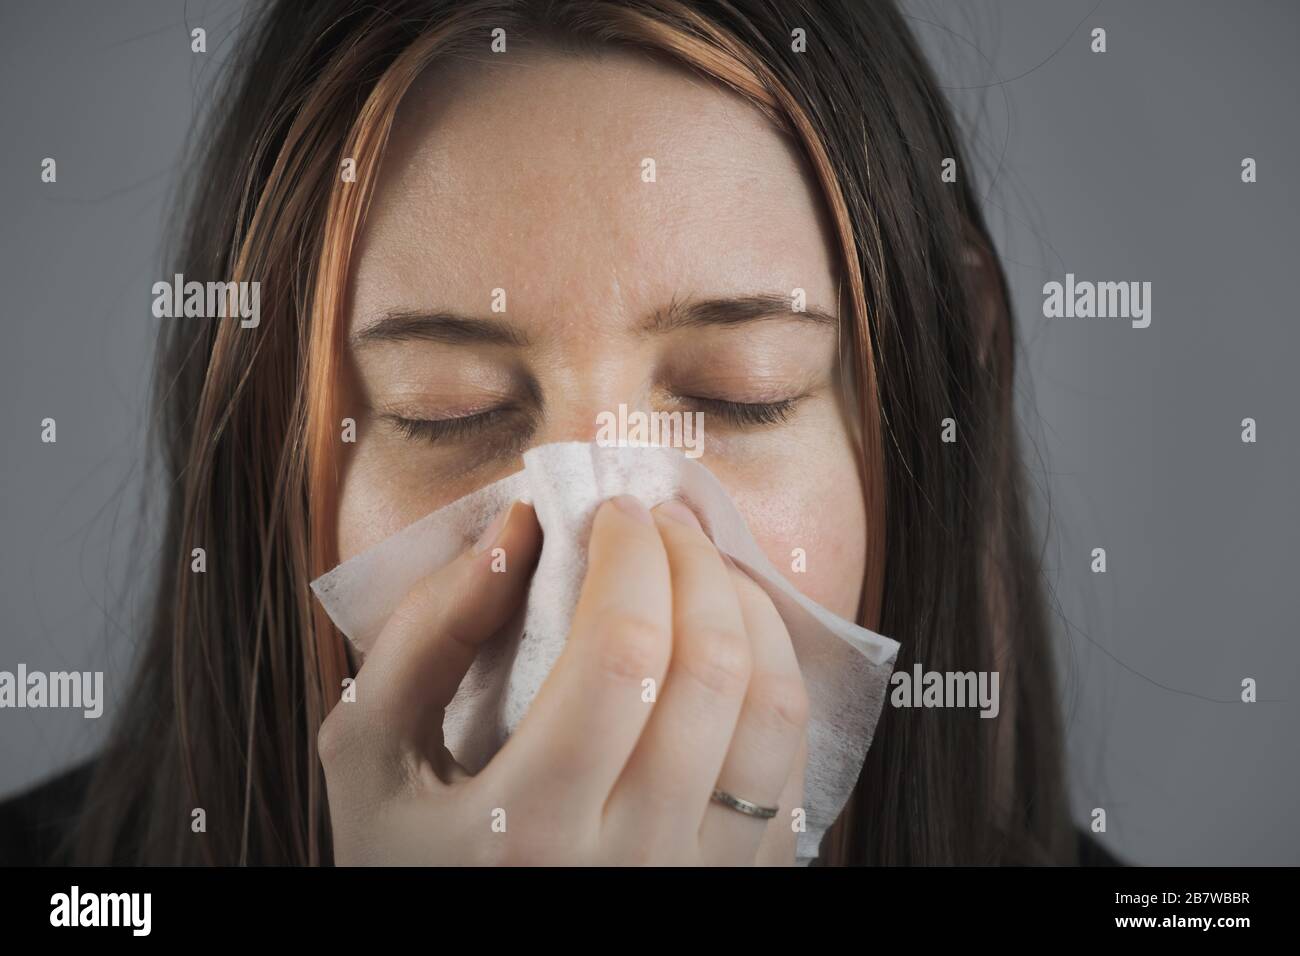 Sneezing, coughing or blowing nose in a single use paper towl. Concept of catching cold, virus or infection and not spreading it Stock Photo